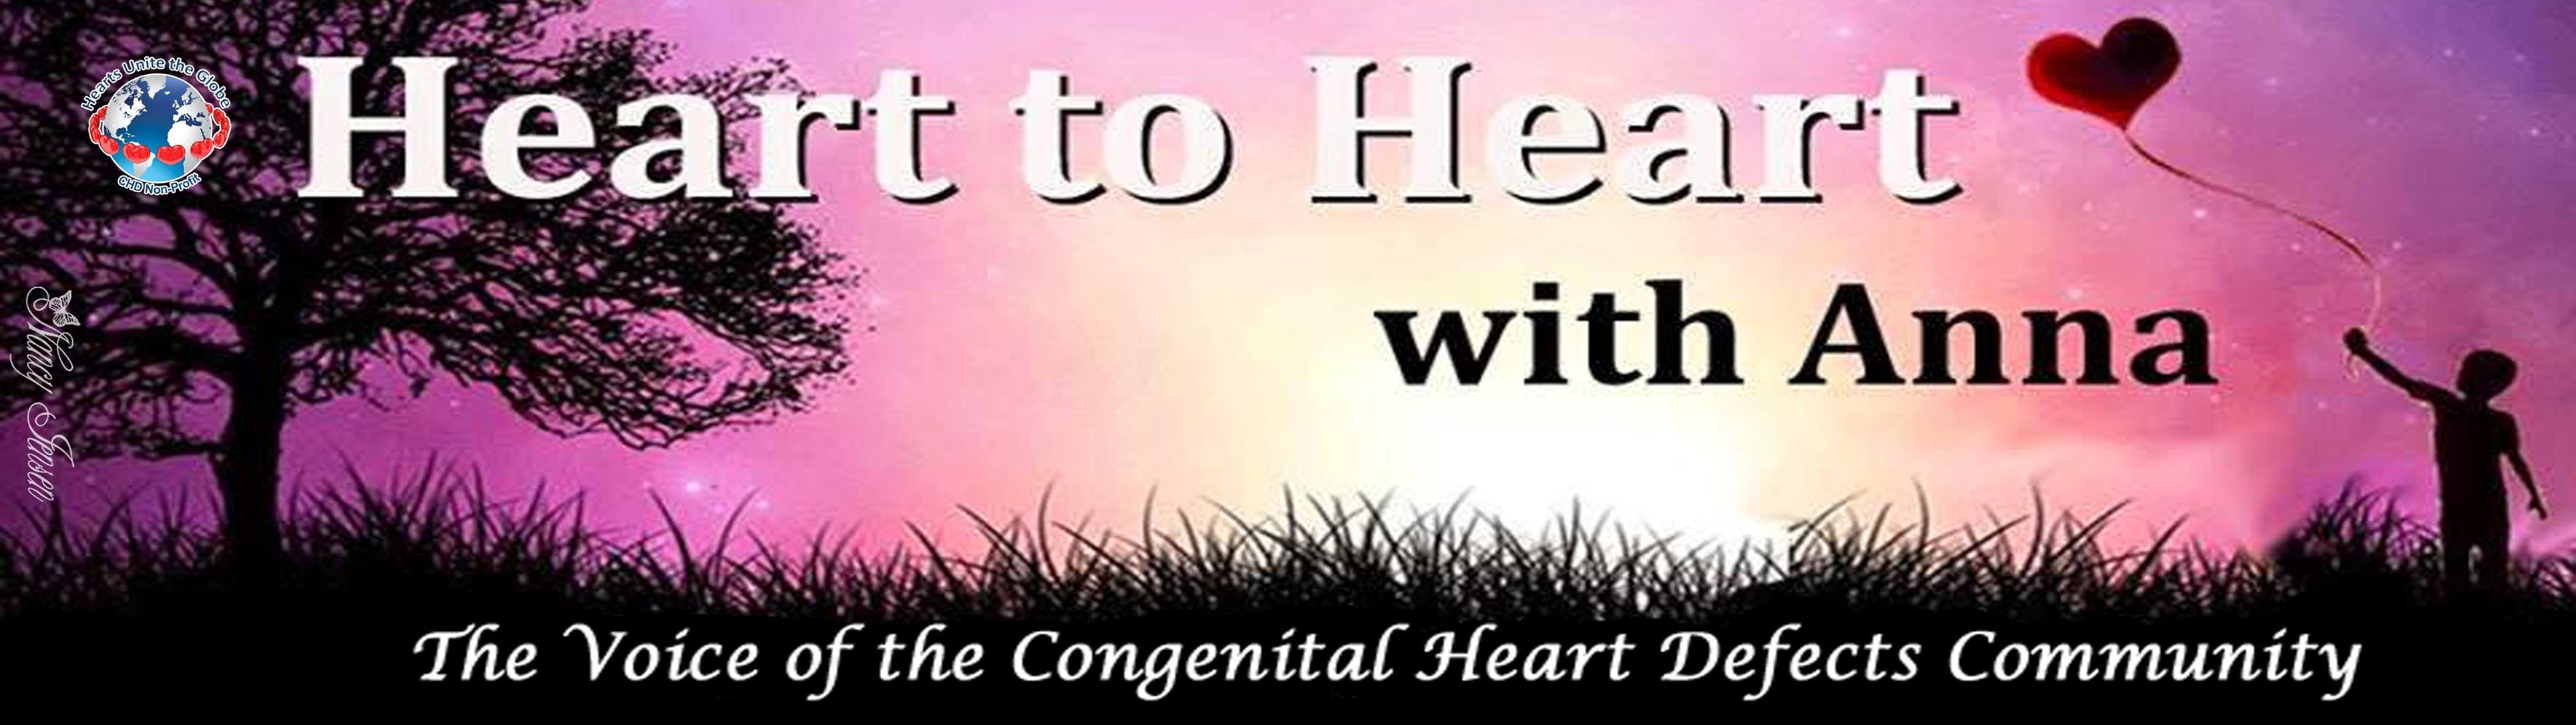 The Voice of the Congenital Heart Defect Community